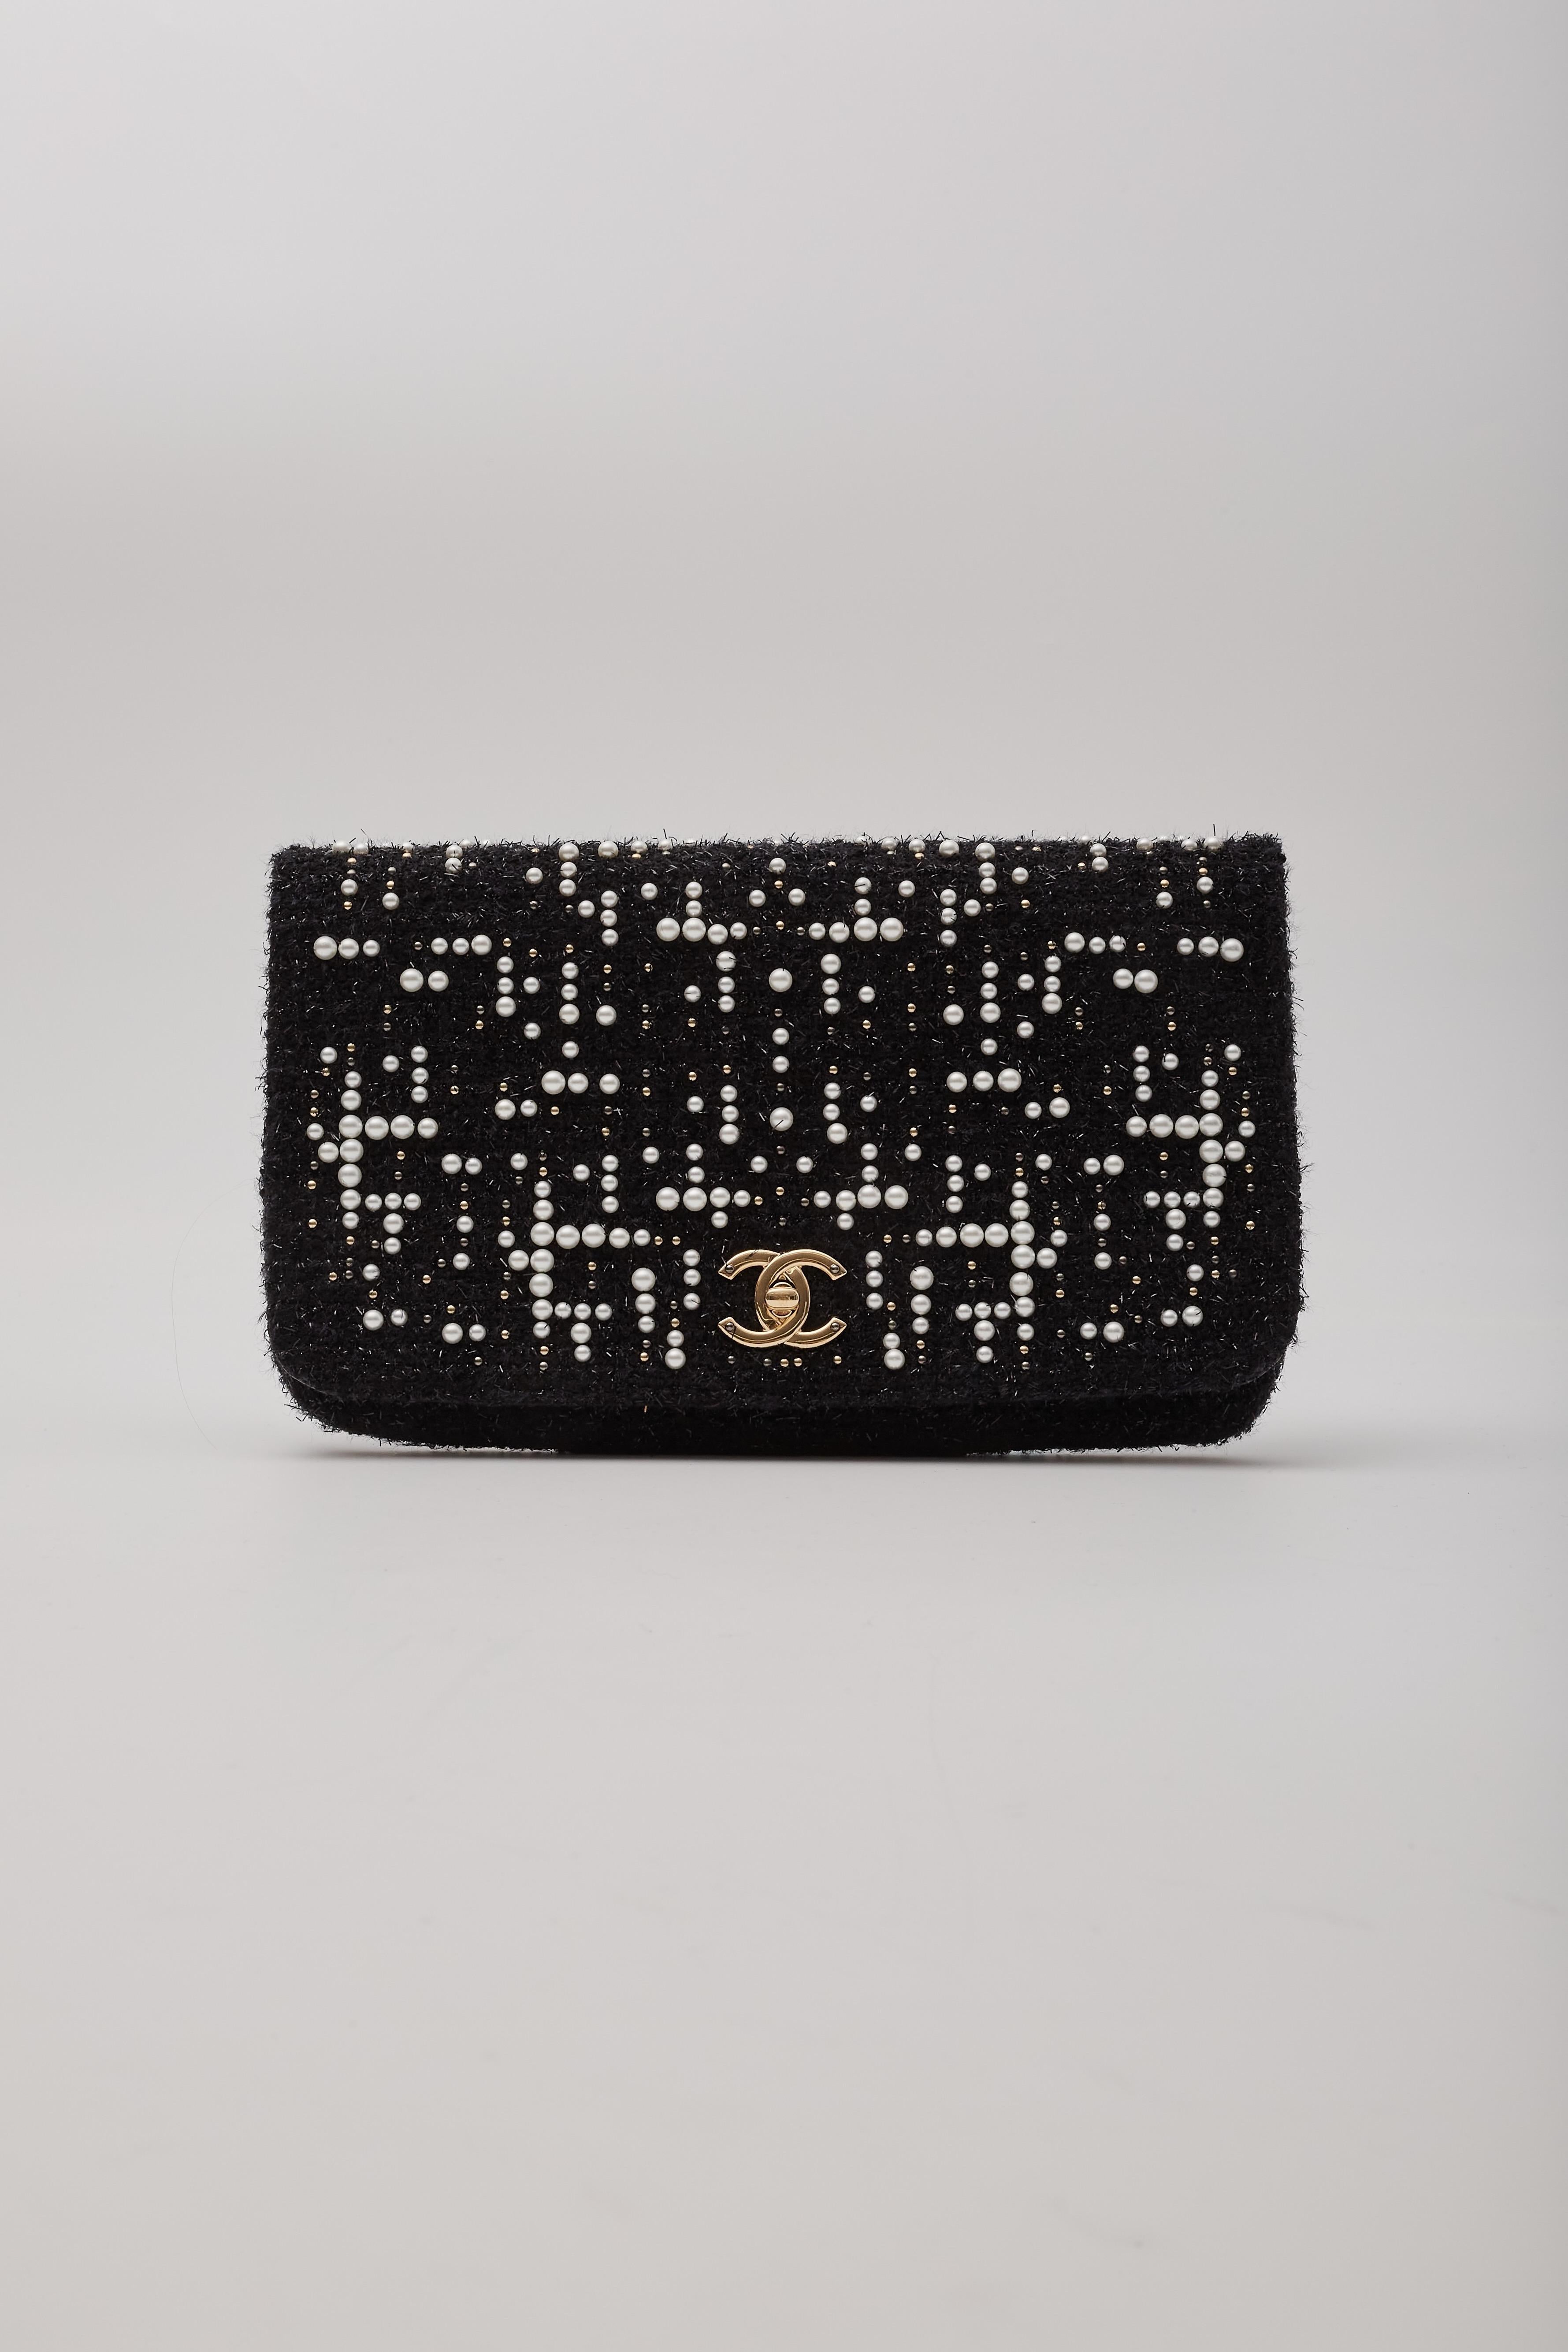 Chanel Paris Cosmopolite Pearl Fantasy Tweed Flap Clutch Bag In Good Condition For Sale In Montreal, Quebec